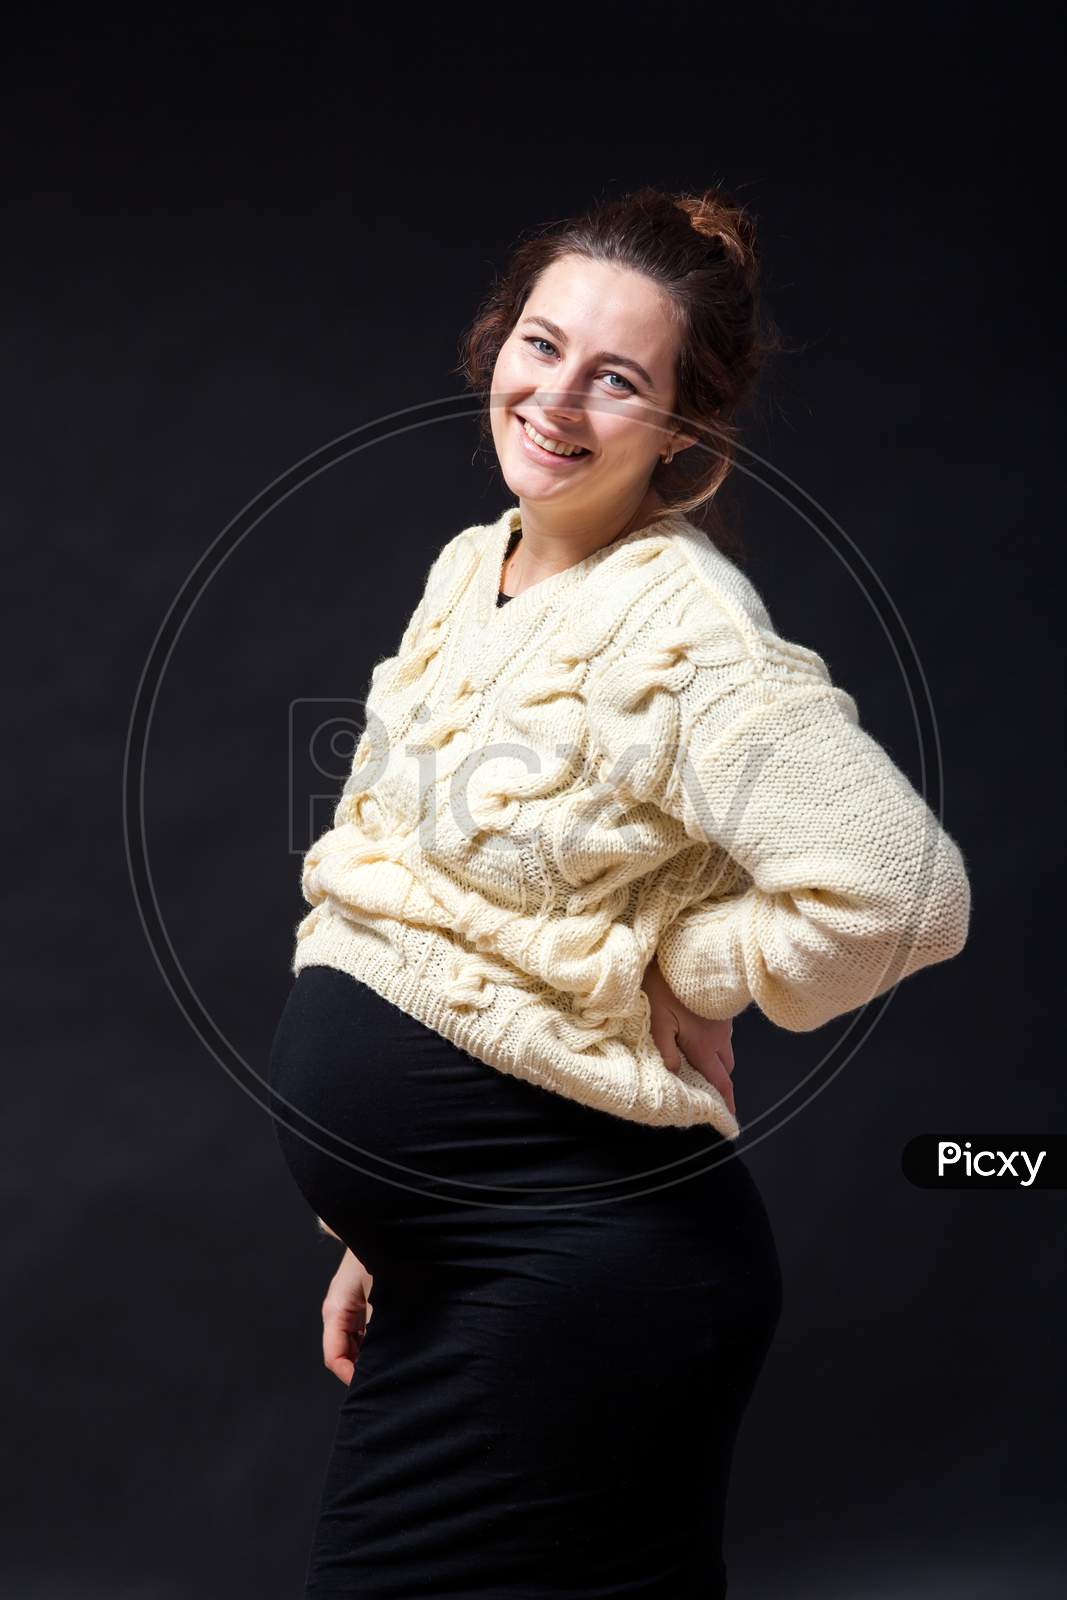 Close-Up Of A Young Pregnant Woman Woman In A Knitted Milk-Colored Sweater And A Black Dress Smiling And Holding Herself Behind Her Back On A Black Isolated Background